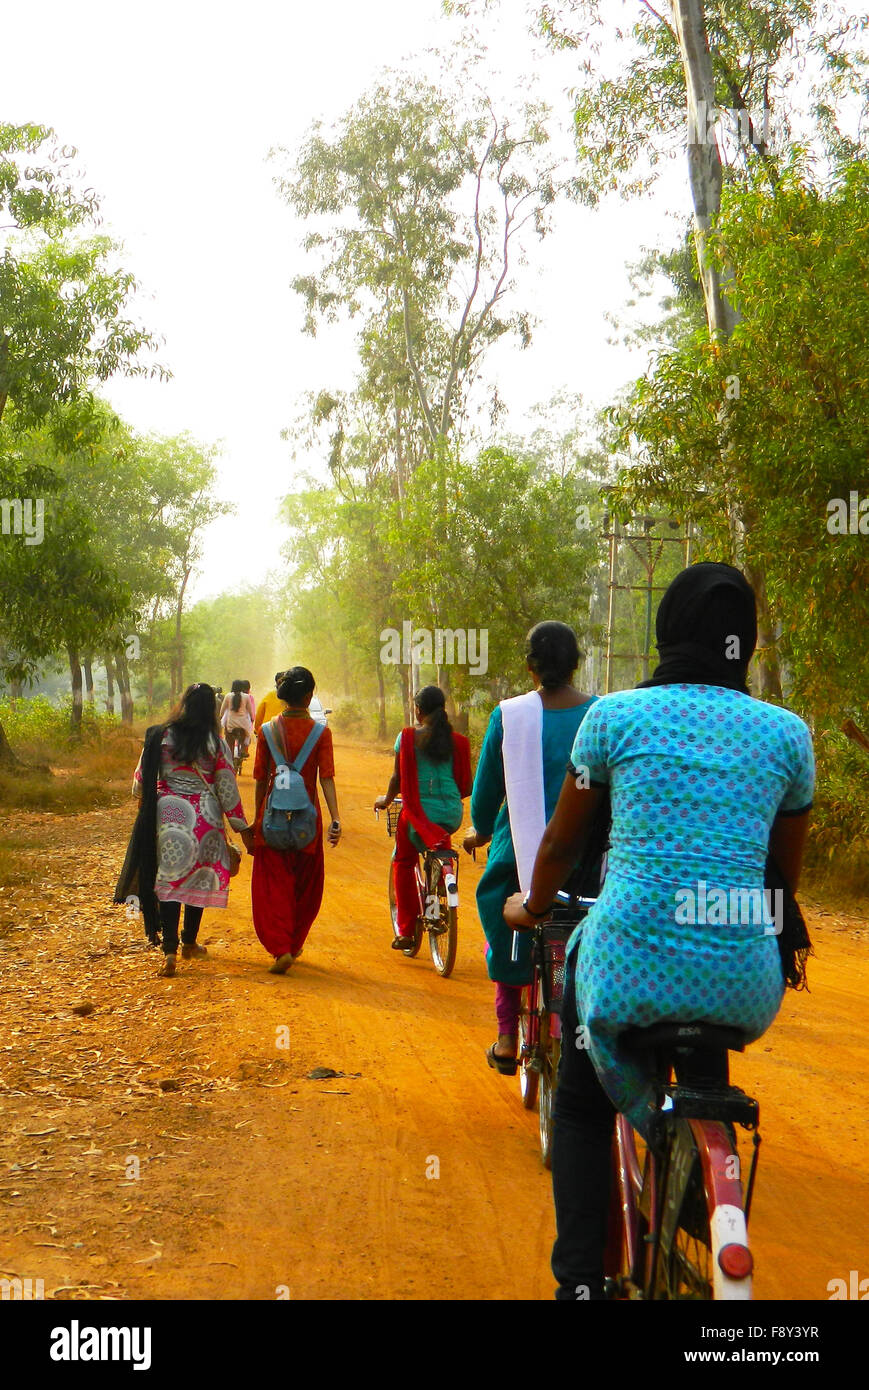 Way Back to Home, Busy Road with Cycling Girls and Pedestrian Stock Photo